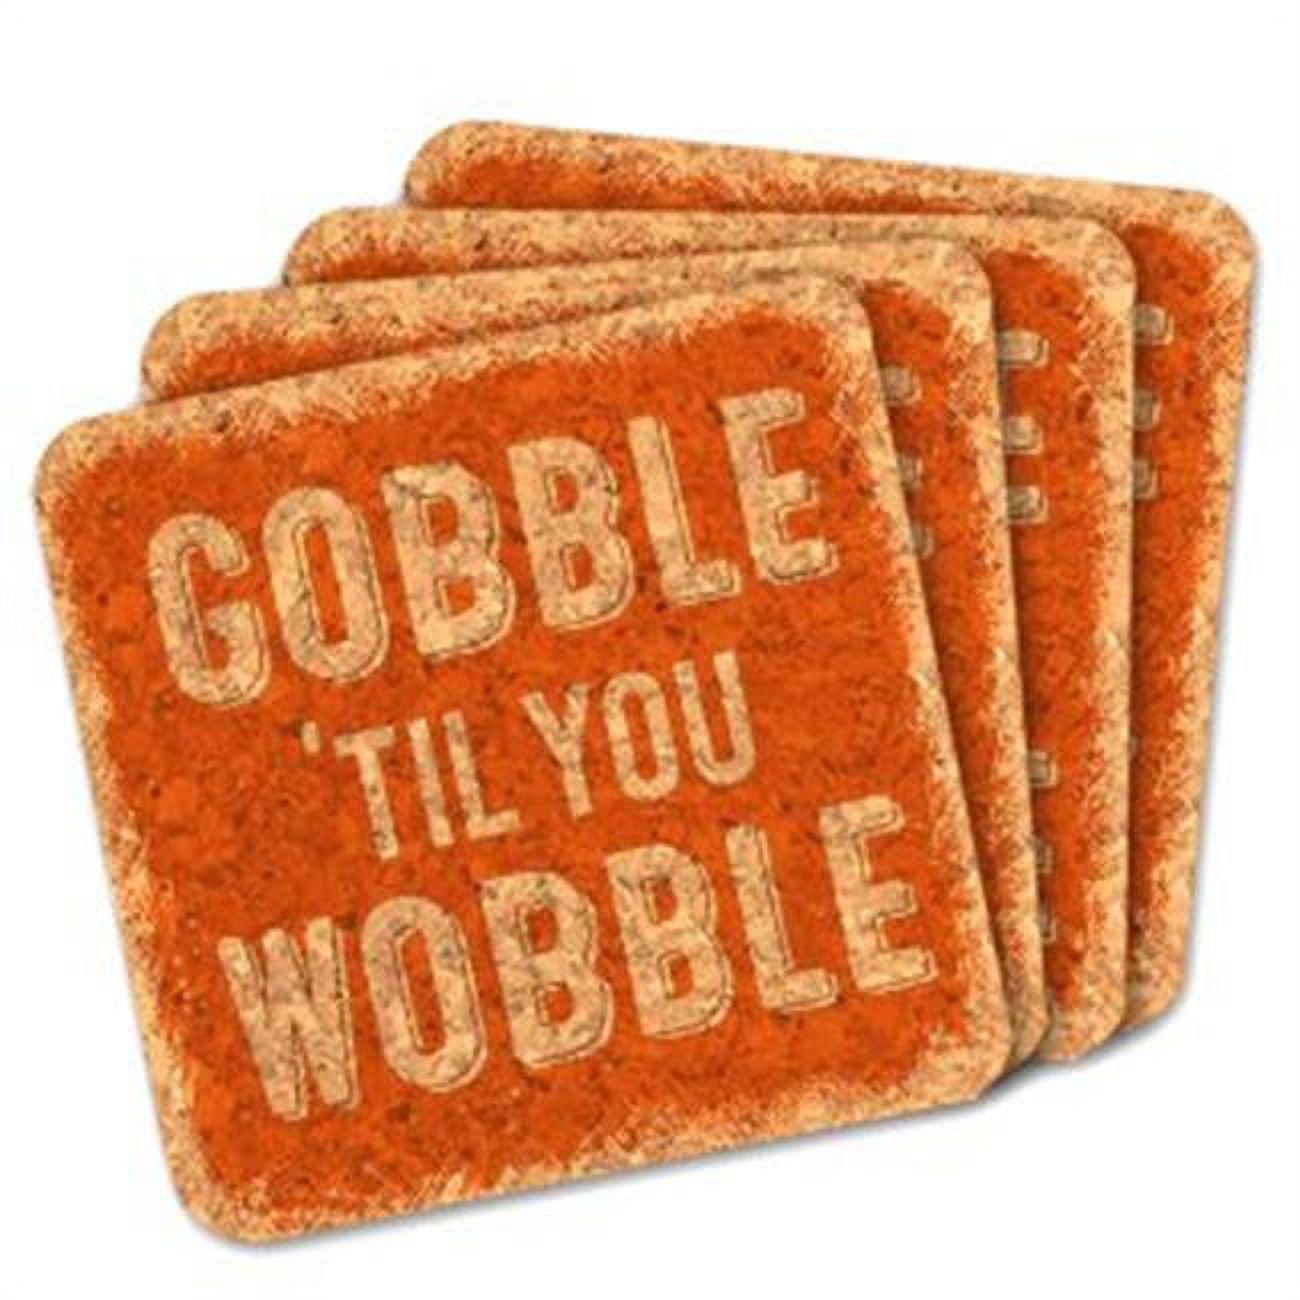 8407238 4 X 4 In. Gobble Til You Wobble Square Cork Coasters - Set Of 4